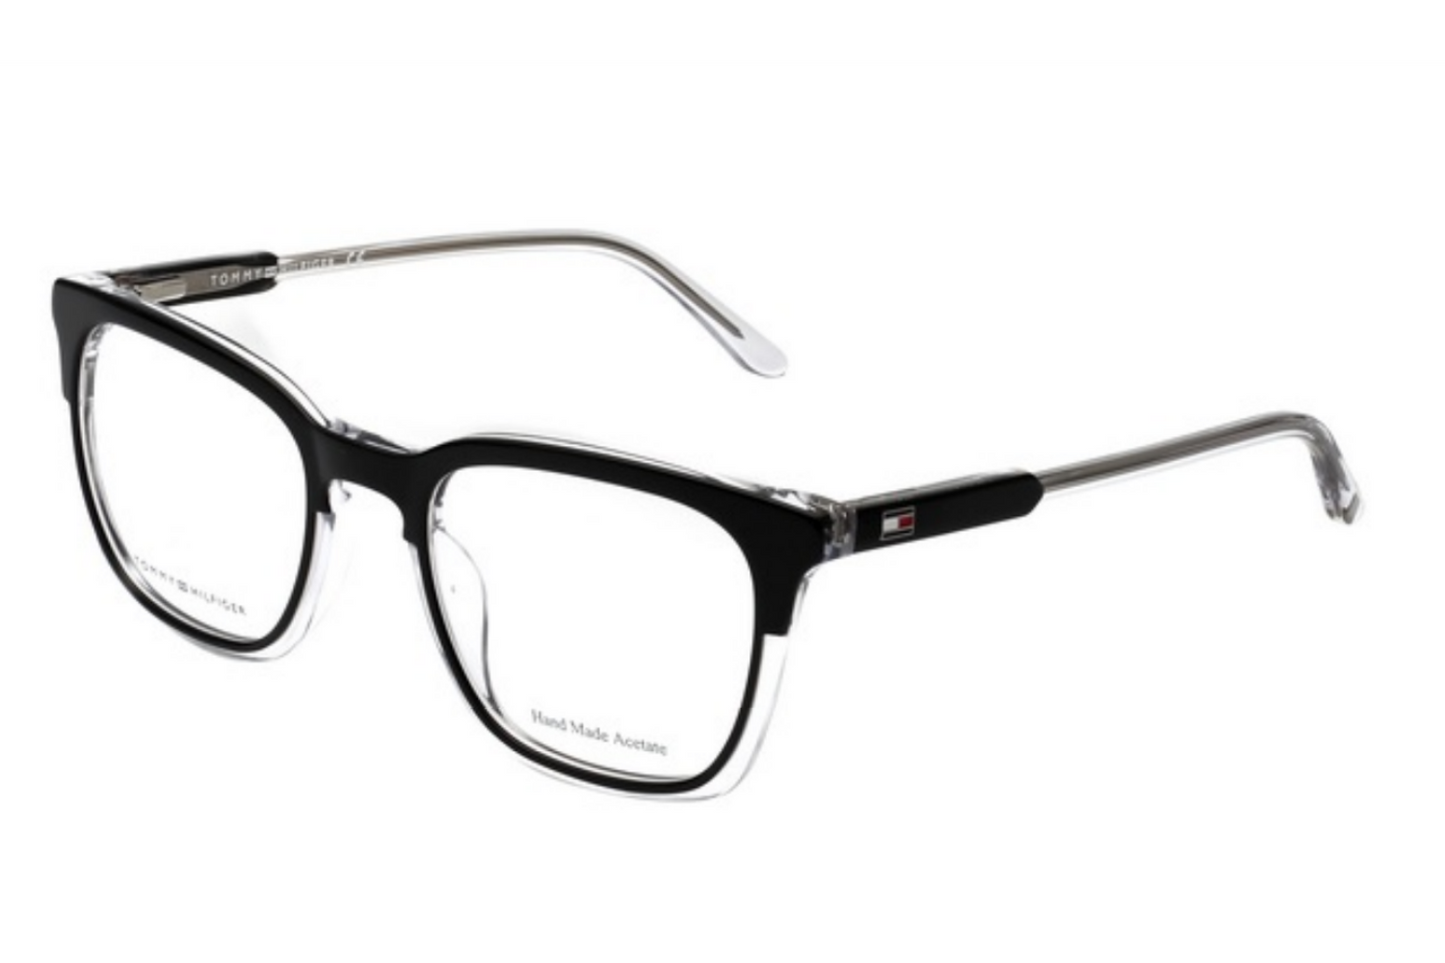 Tommy Hilfiger Frame TH6284 NEW ARRIVAL